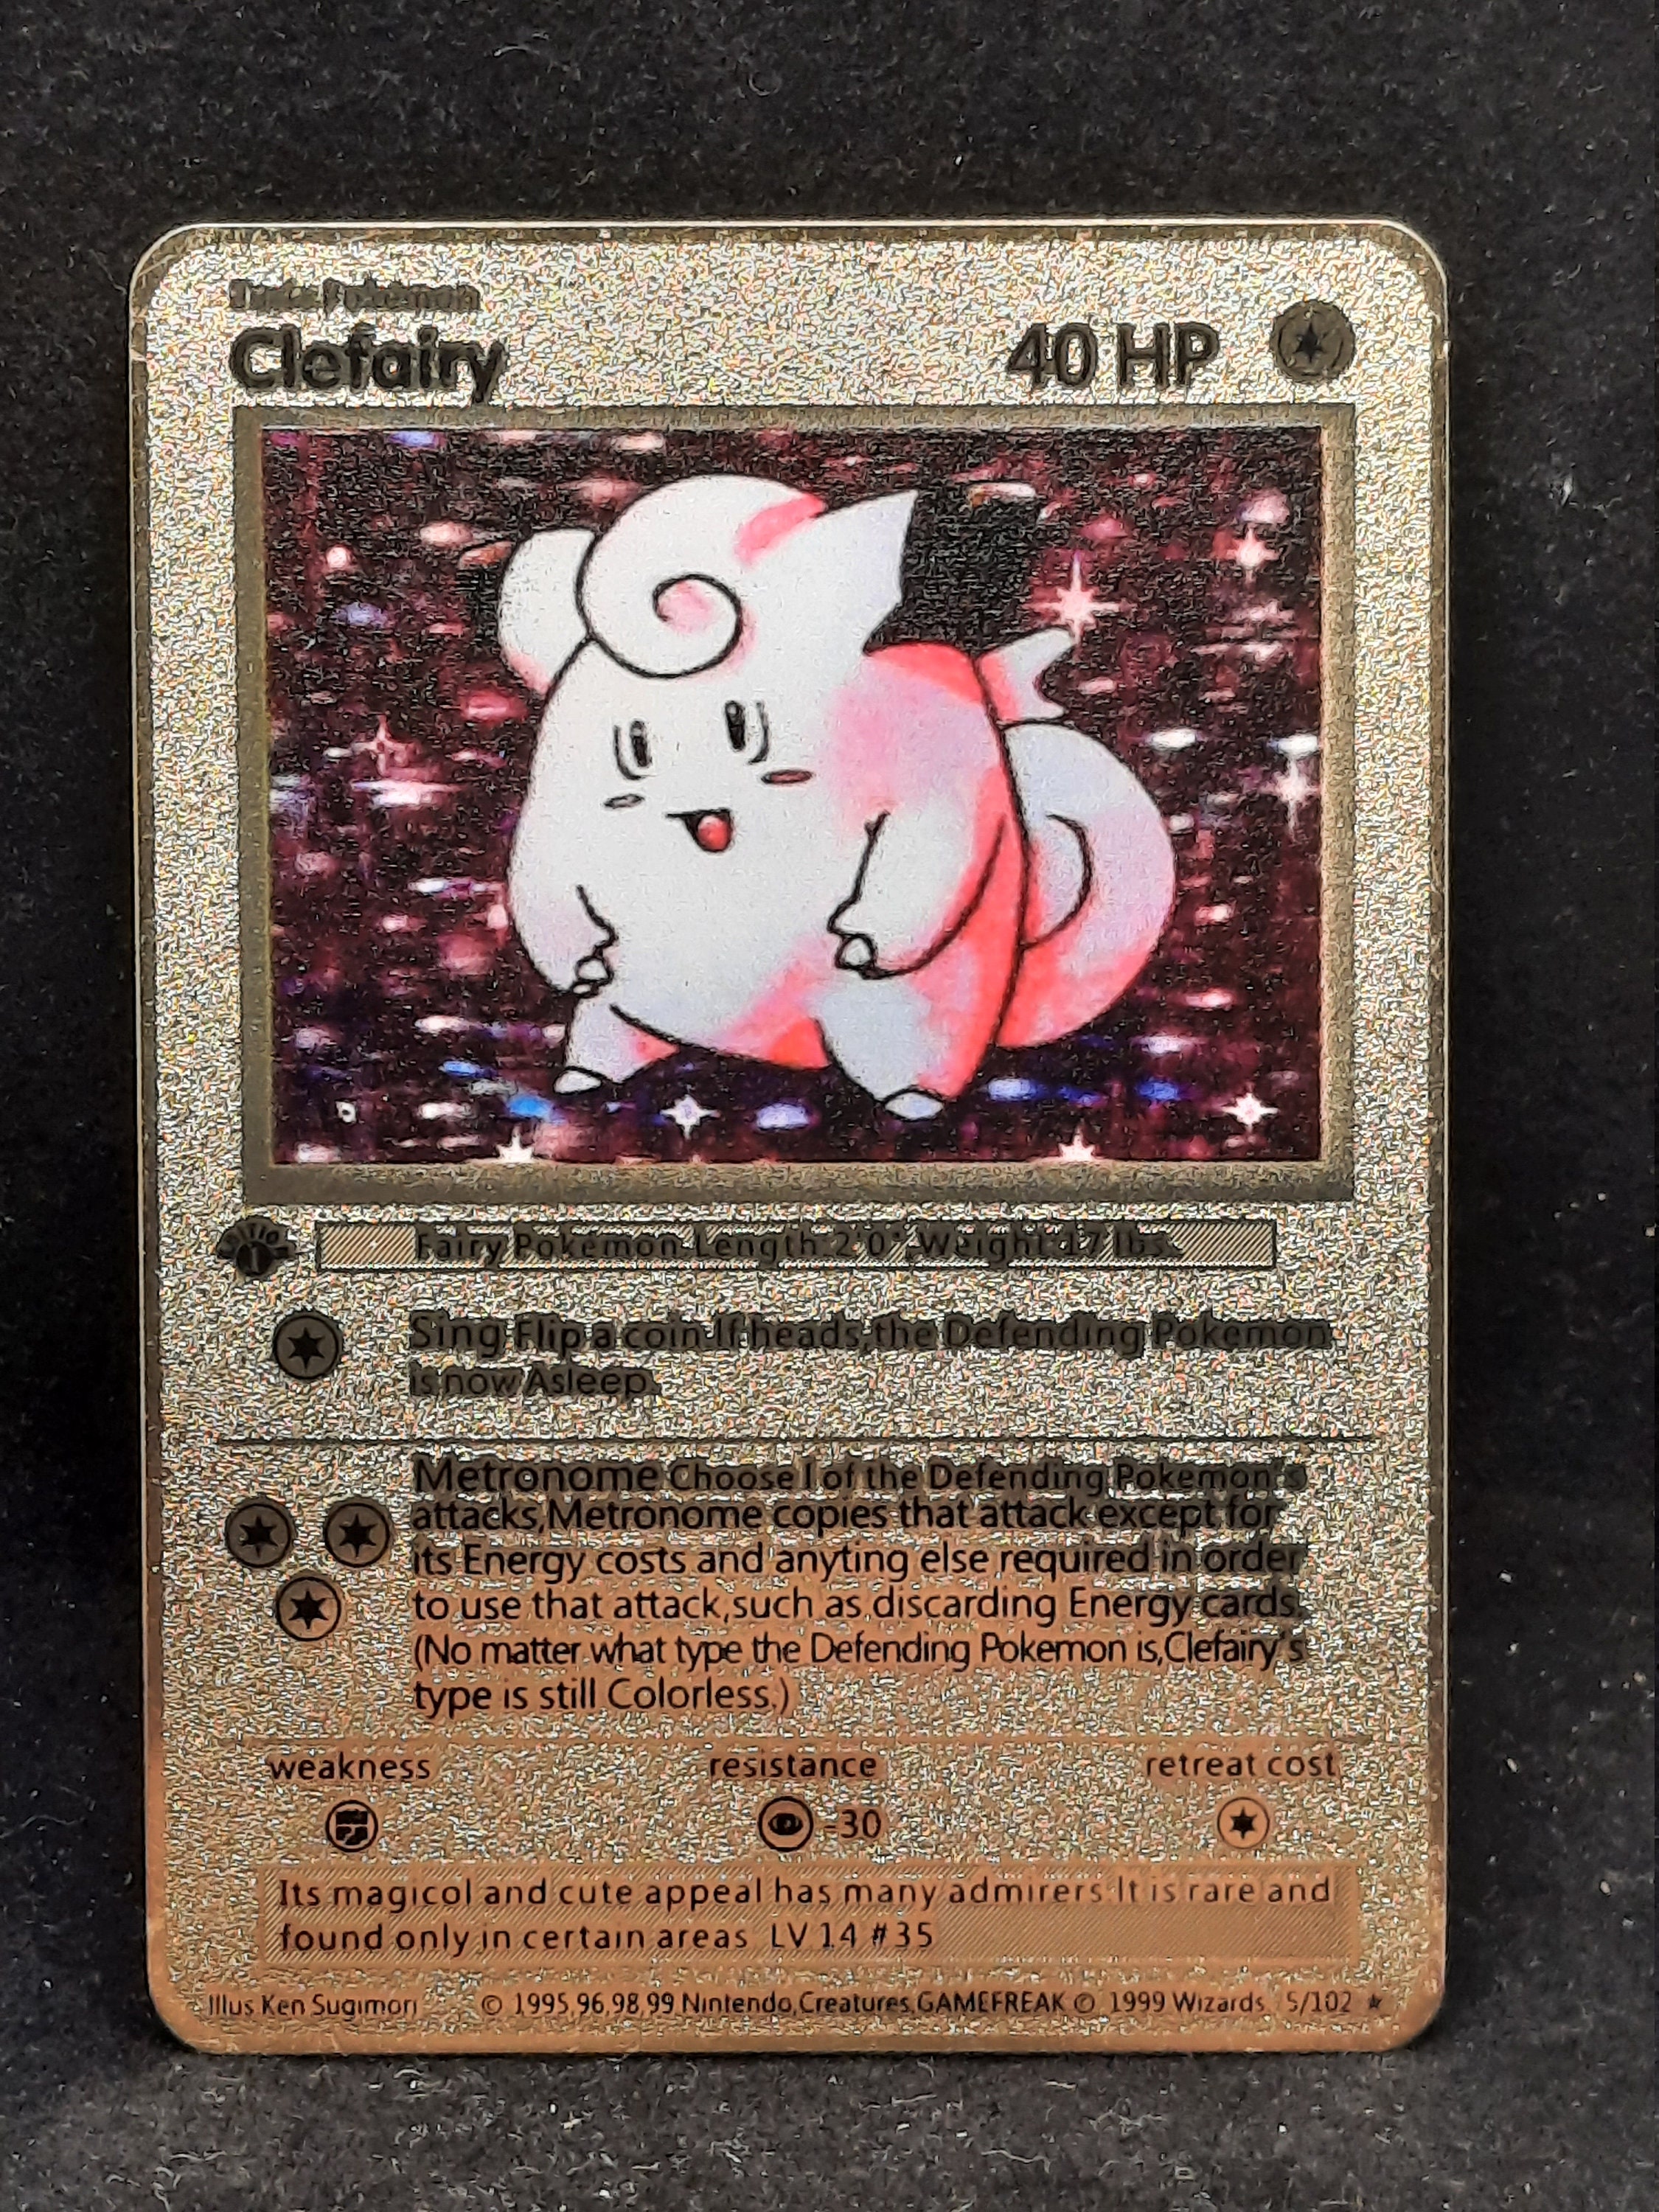 The Original 1999 Pokemon Website Is Still Up! – Cherry Collectables